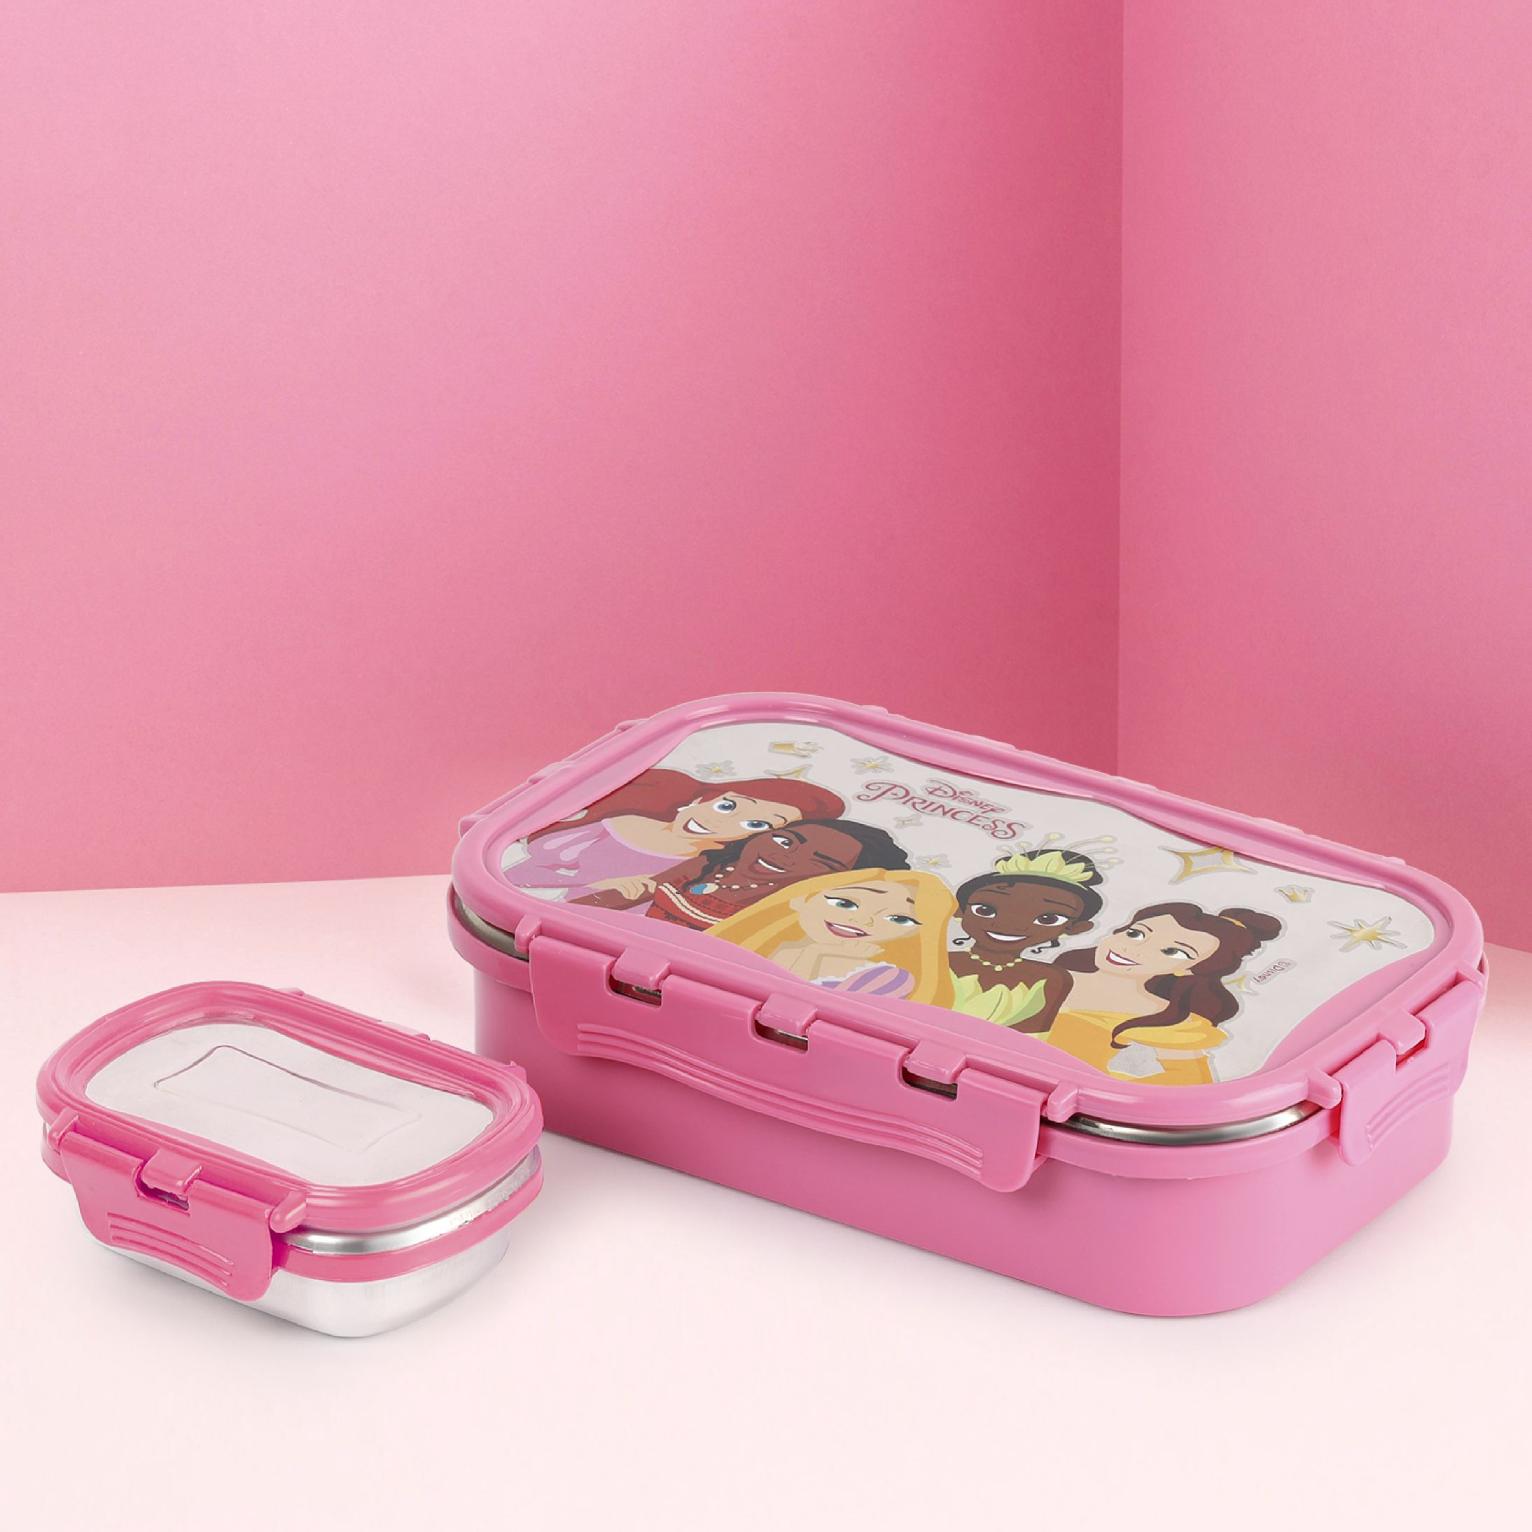 Thermo Click Toons Insulated Lunch Box, Big Pink / Big / Disney Princess